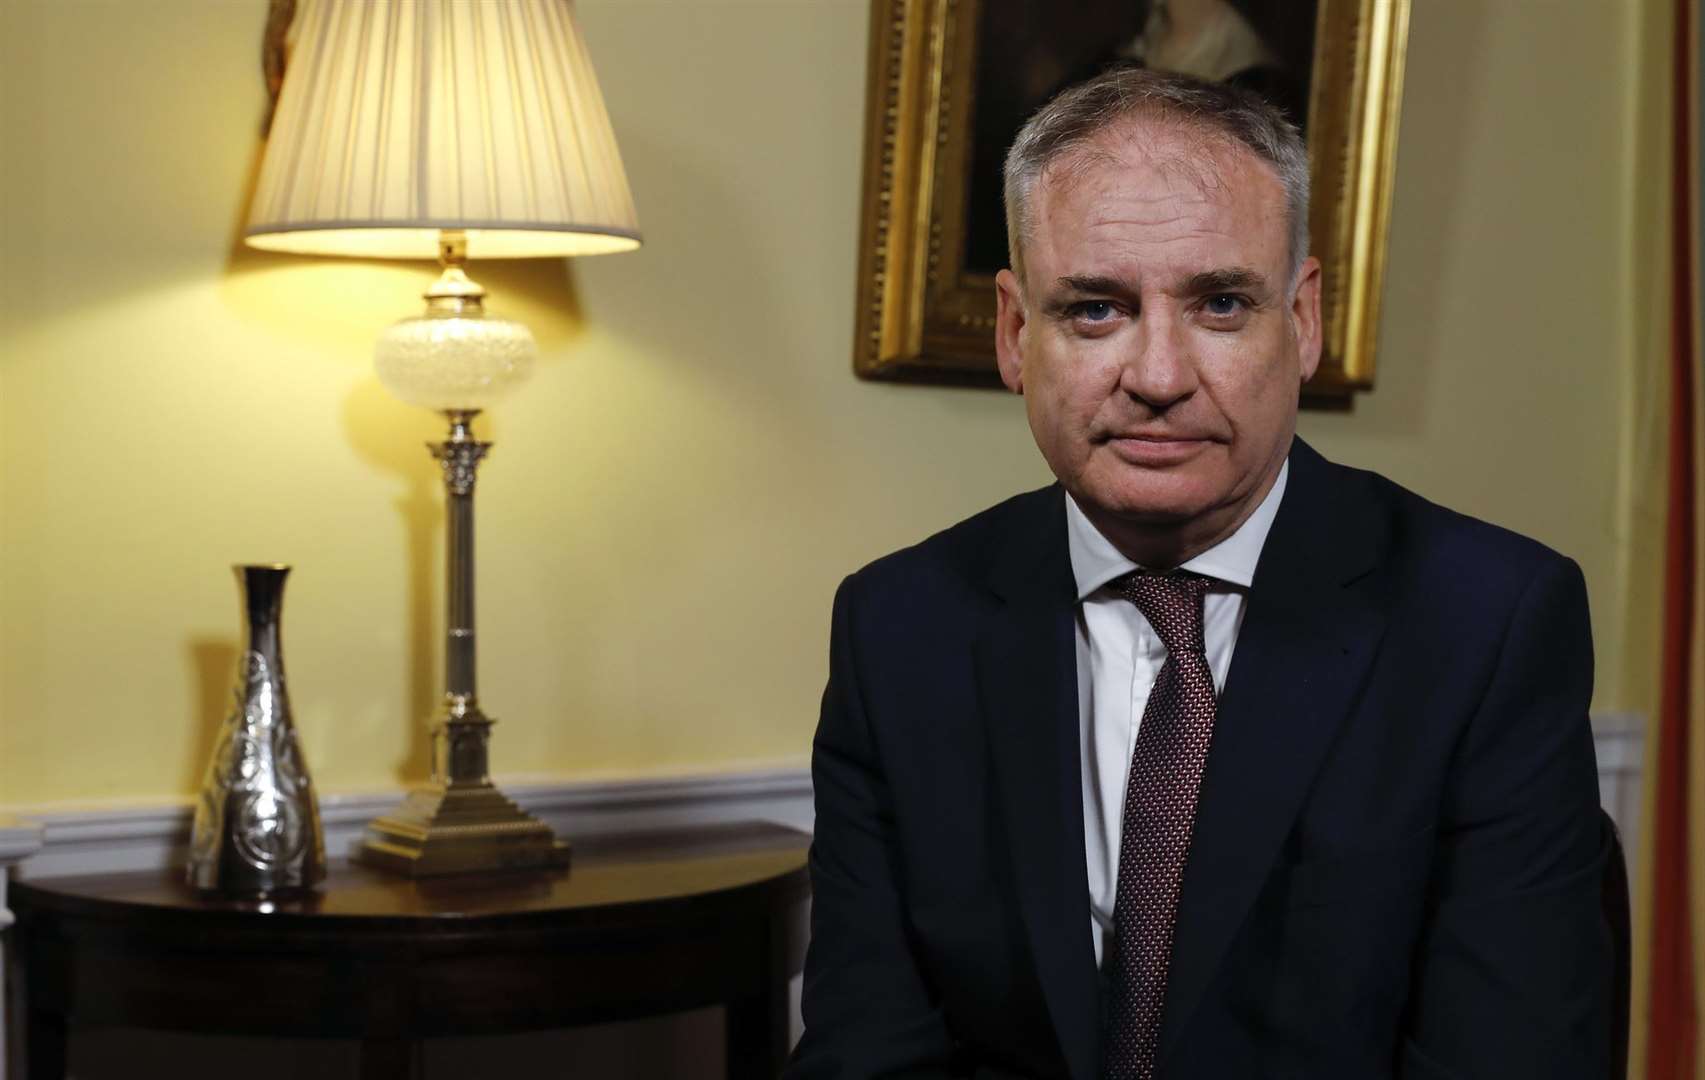 Moray MSP Richard Lochhead raised his concerns following the reports over the past week and urged anyone with any further information to contact the police.